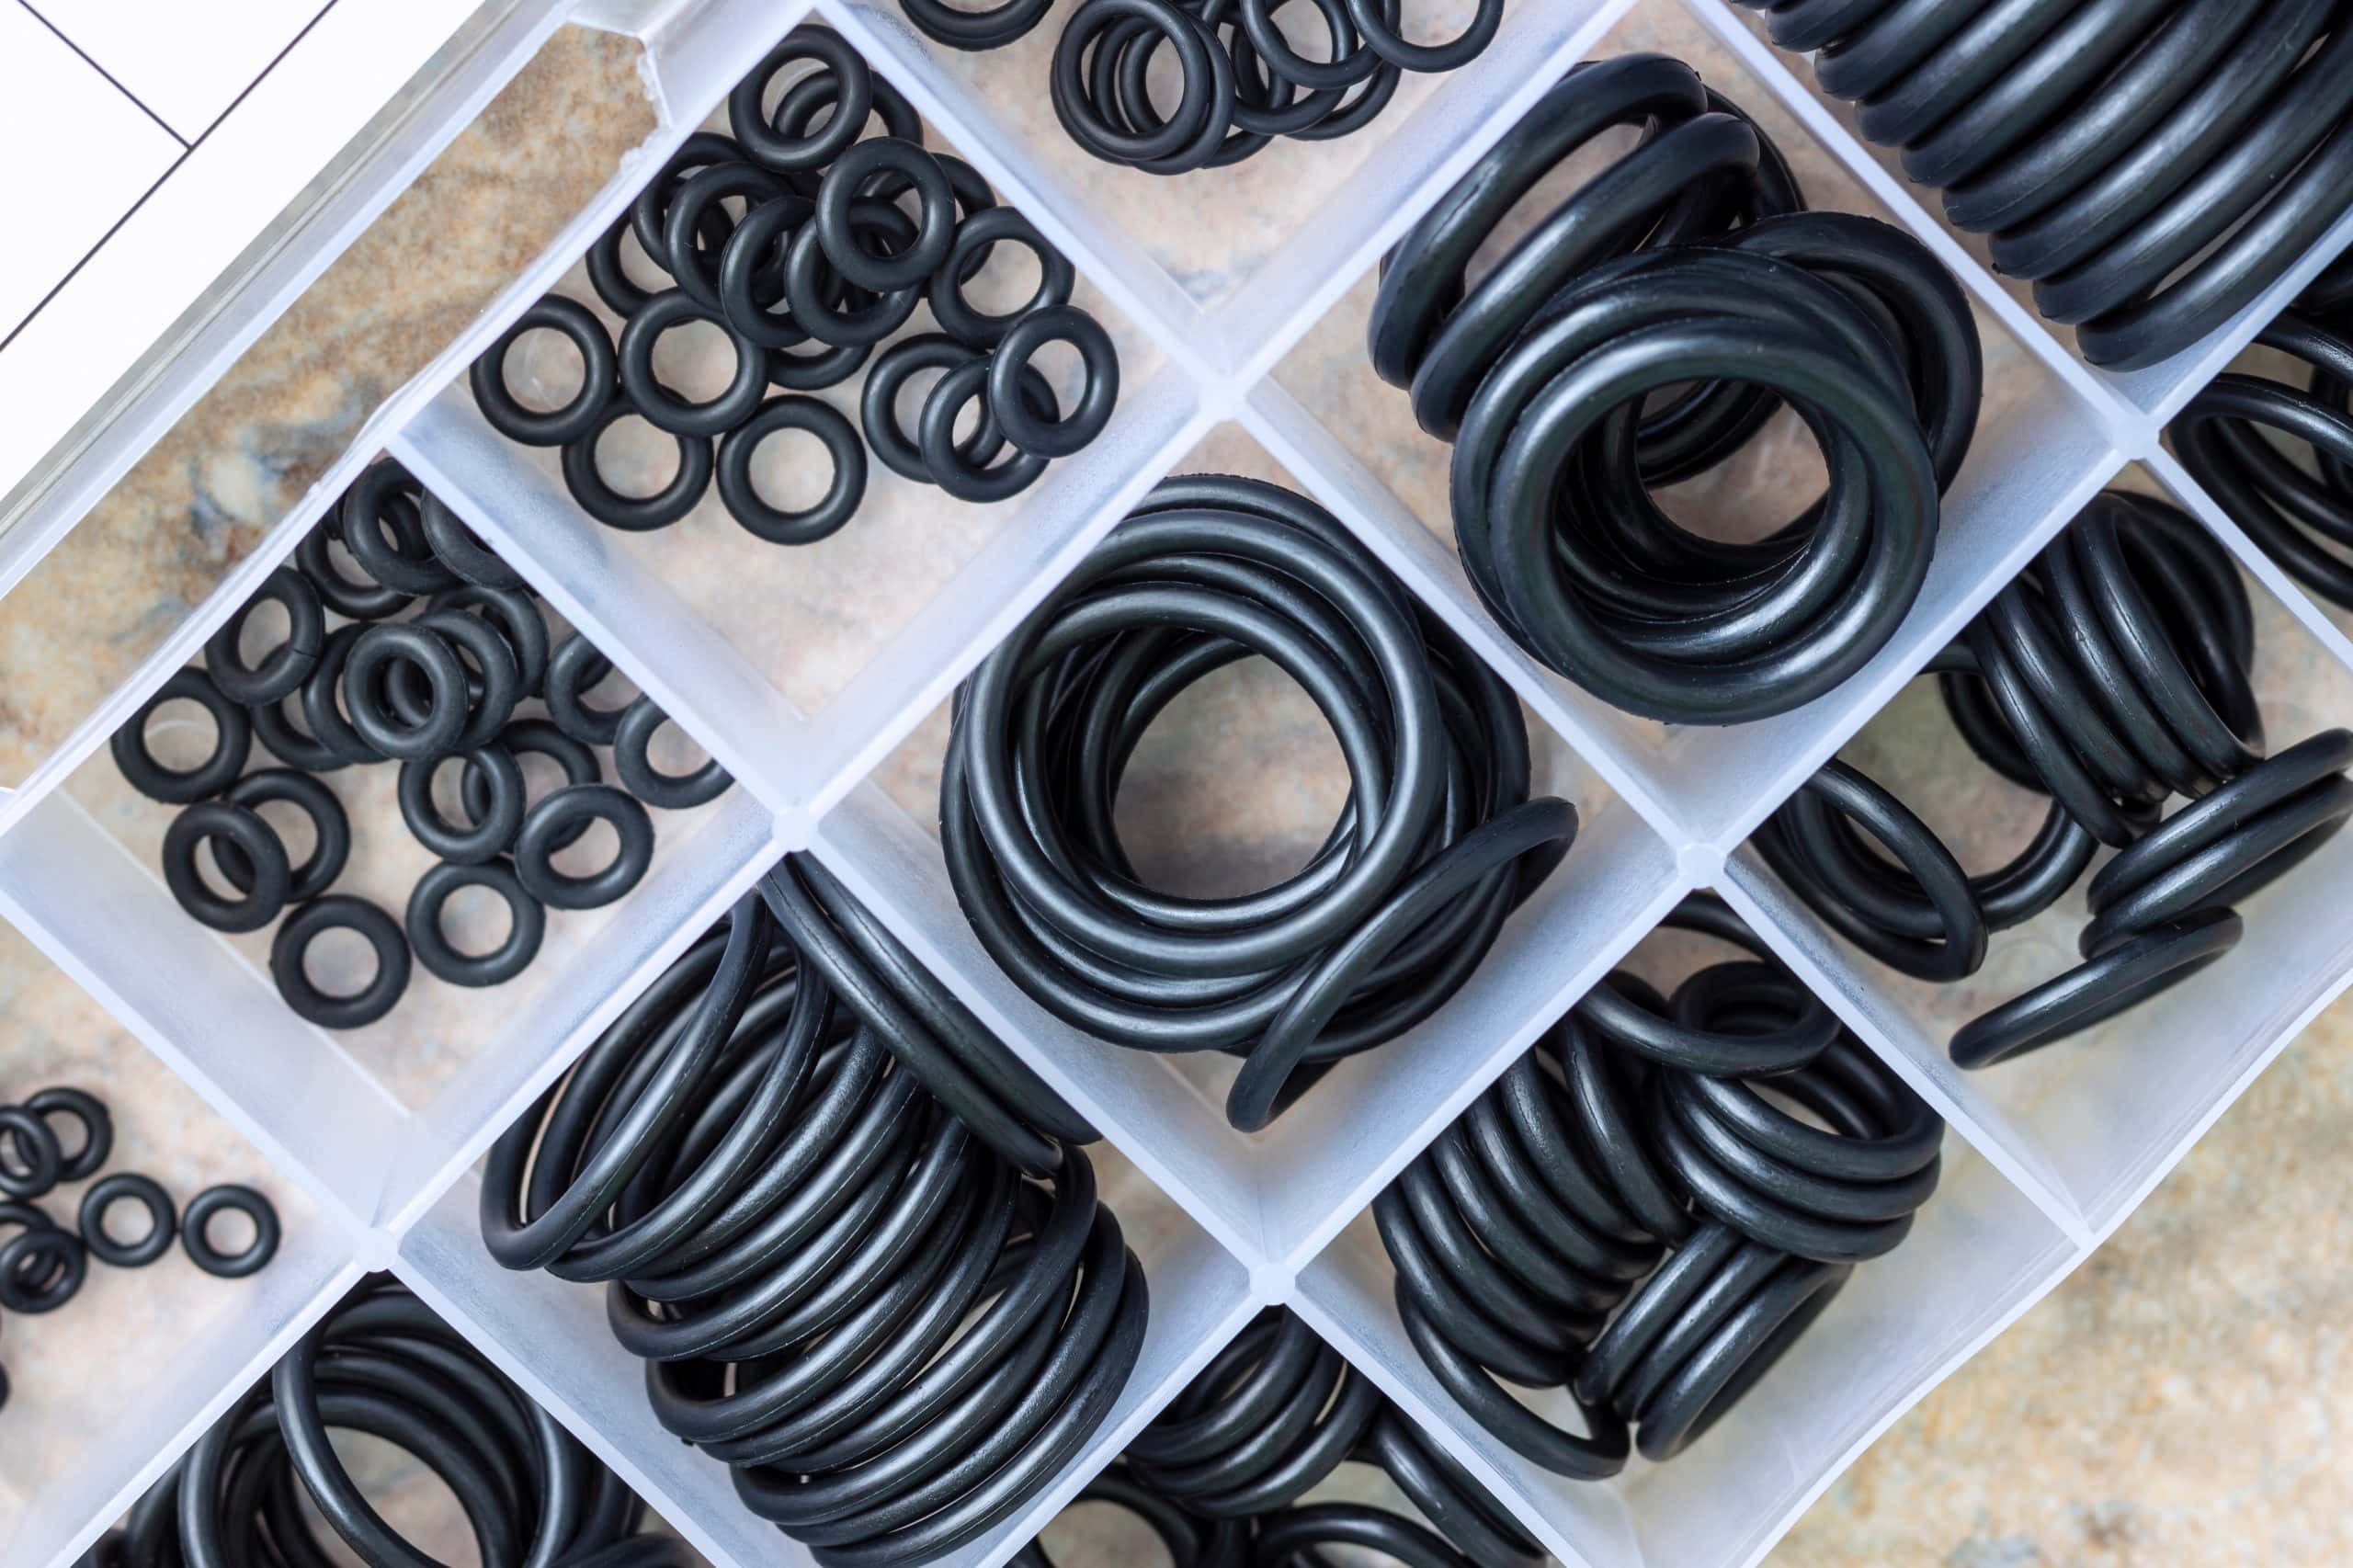 Some high temperature rubber gaskets and seals